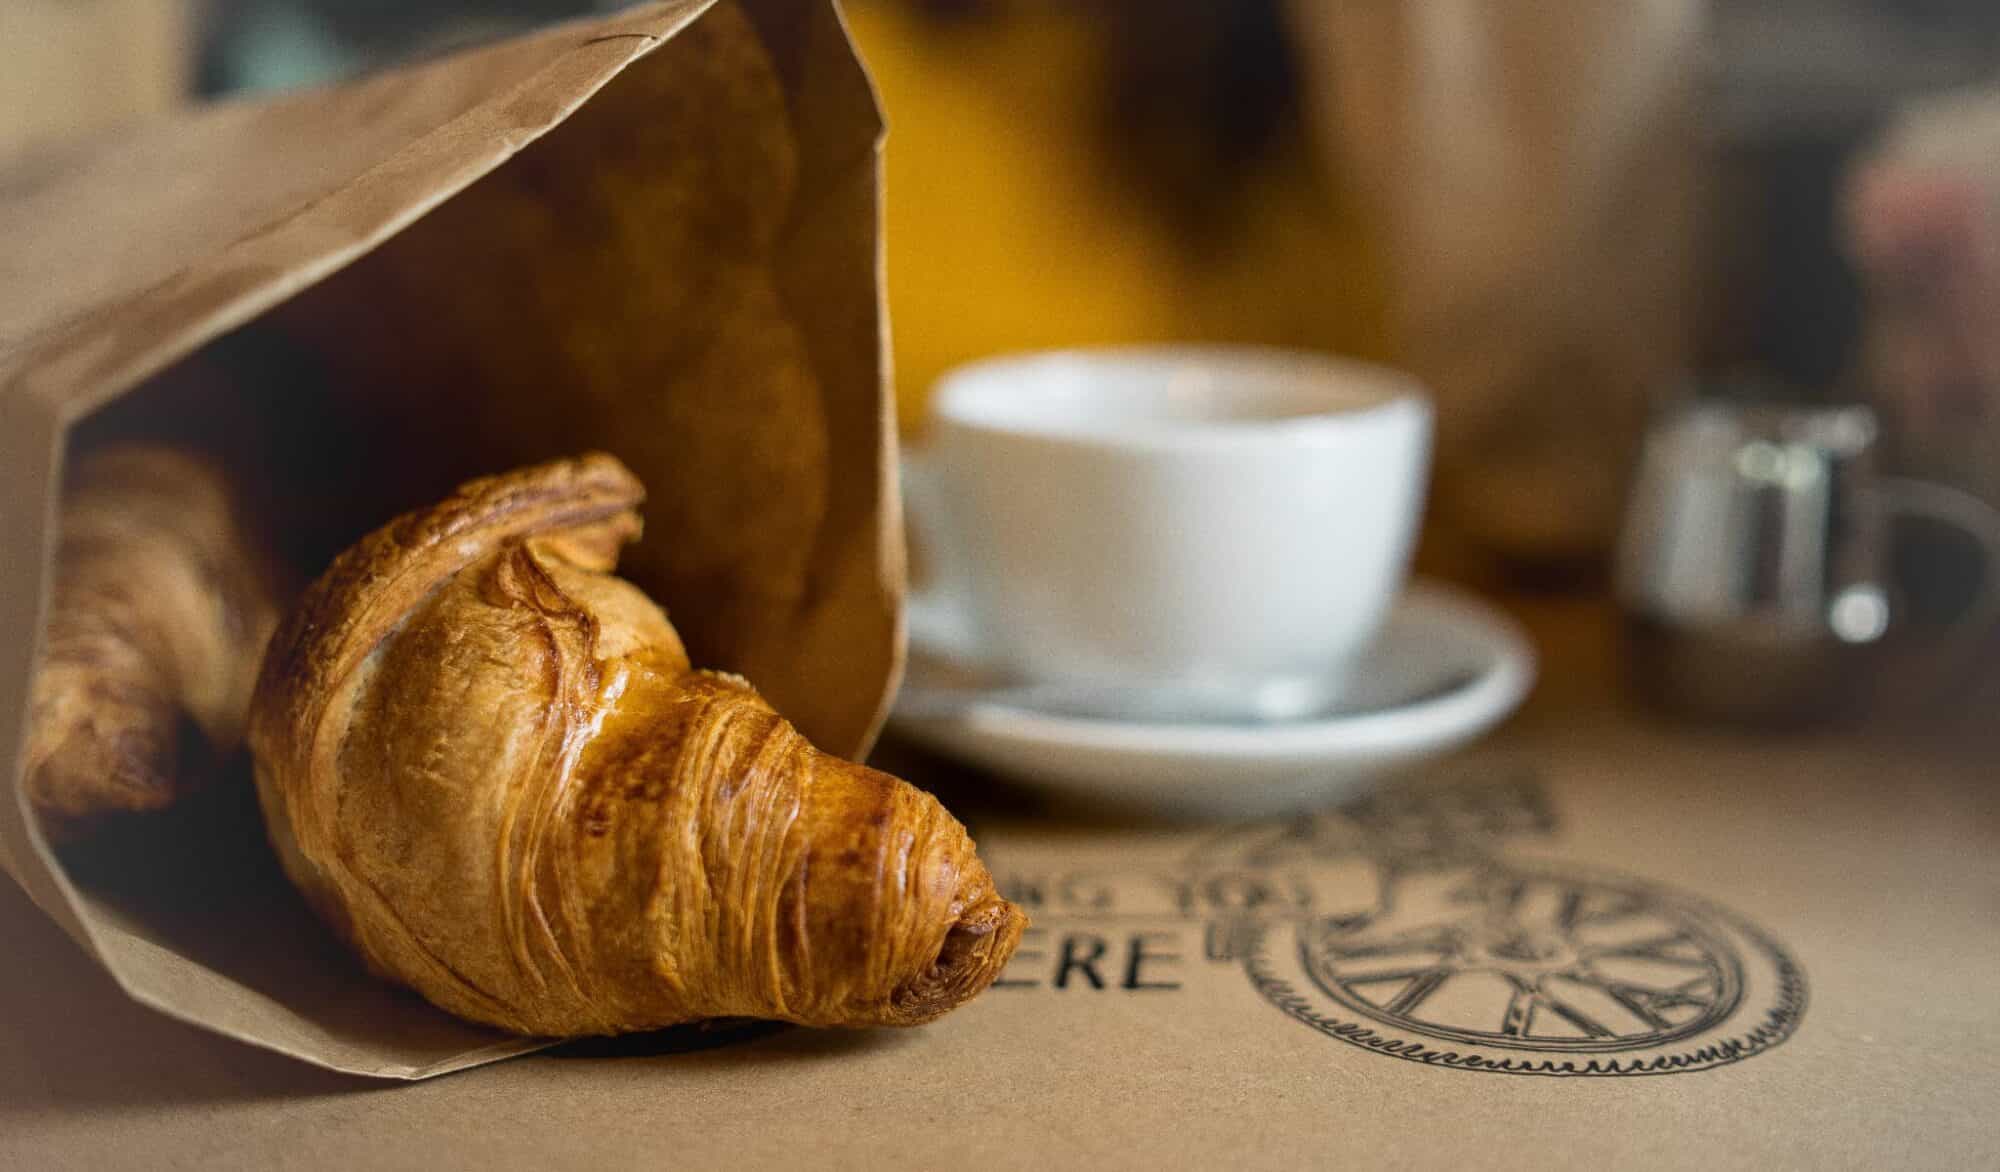 A fresh croissant in a brown bag next to a white cup filled with hot coffee.